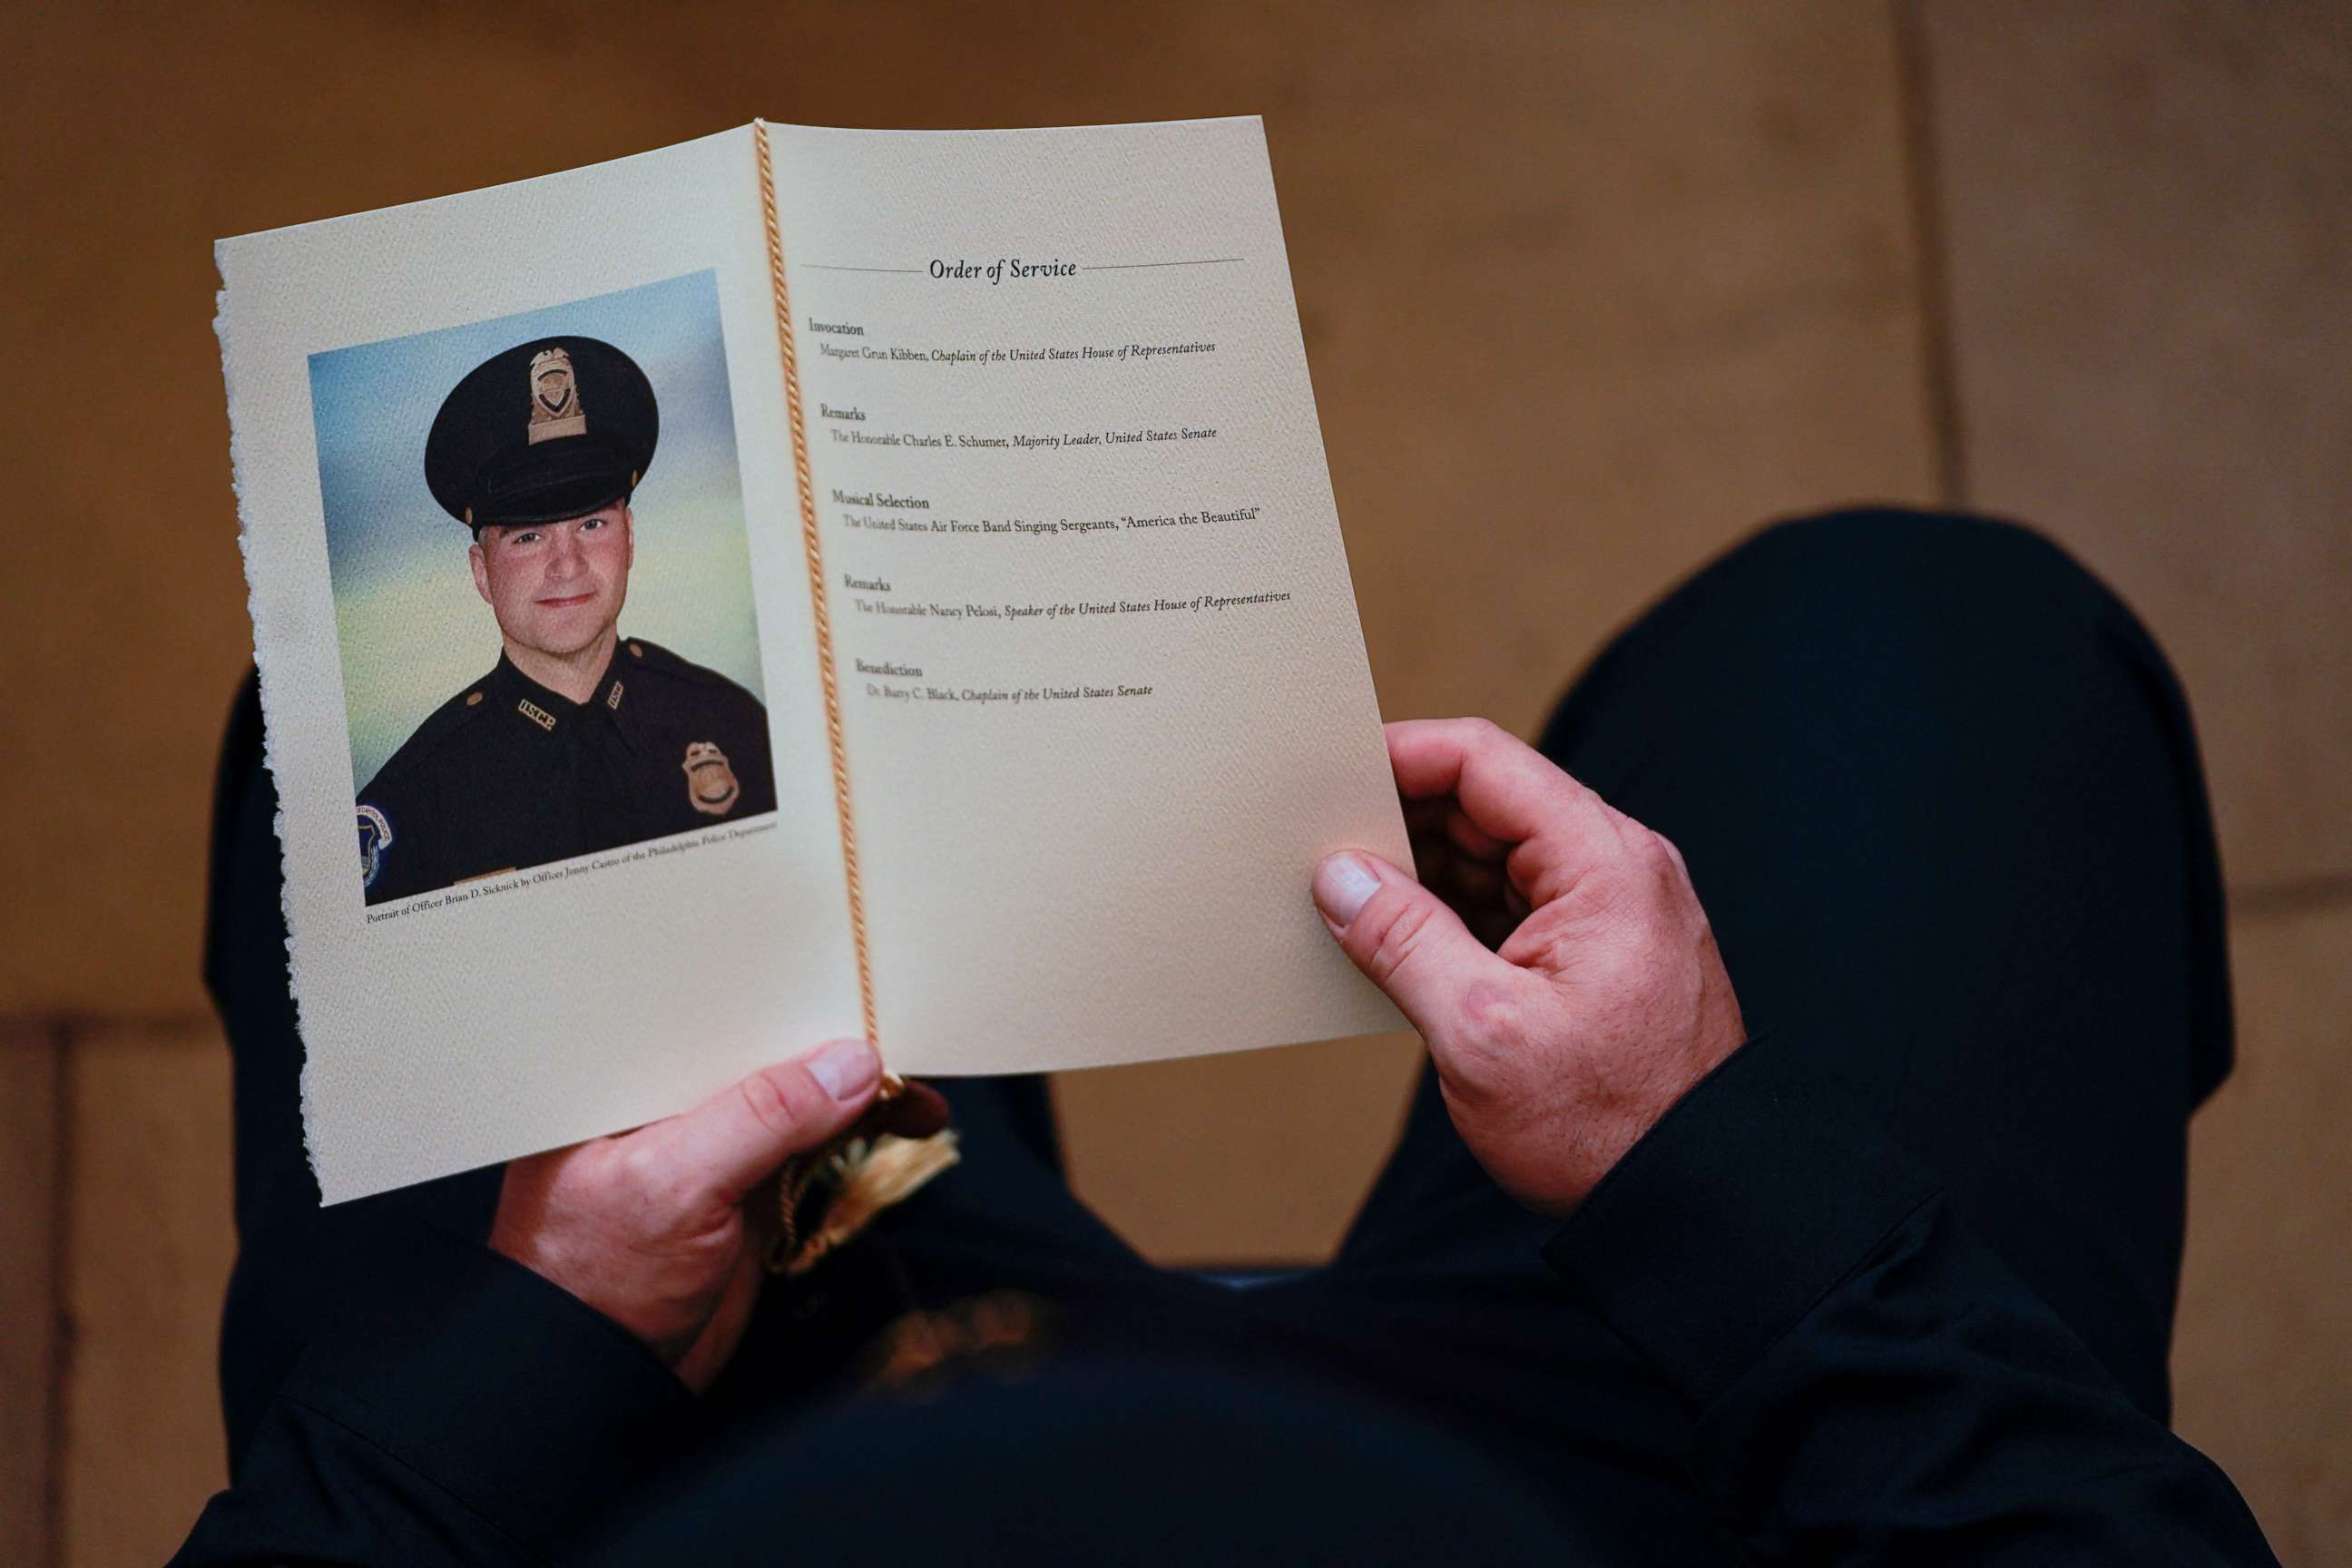 PHOTO: In this Feb. 3, 2021, file photo, a Capitol Police Officer holds a program for a ceremony in honor of Capitol Police officer Brian Sicknick in the Rotunda of the U.S. Capitol in Washington, D.C.